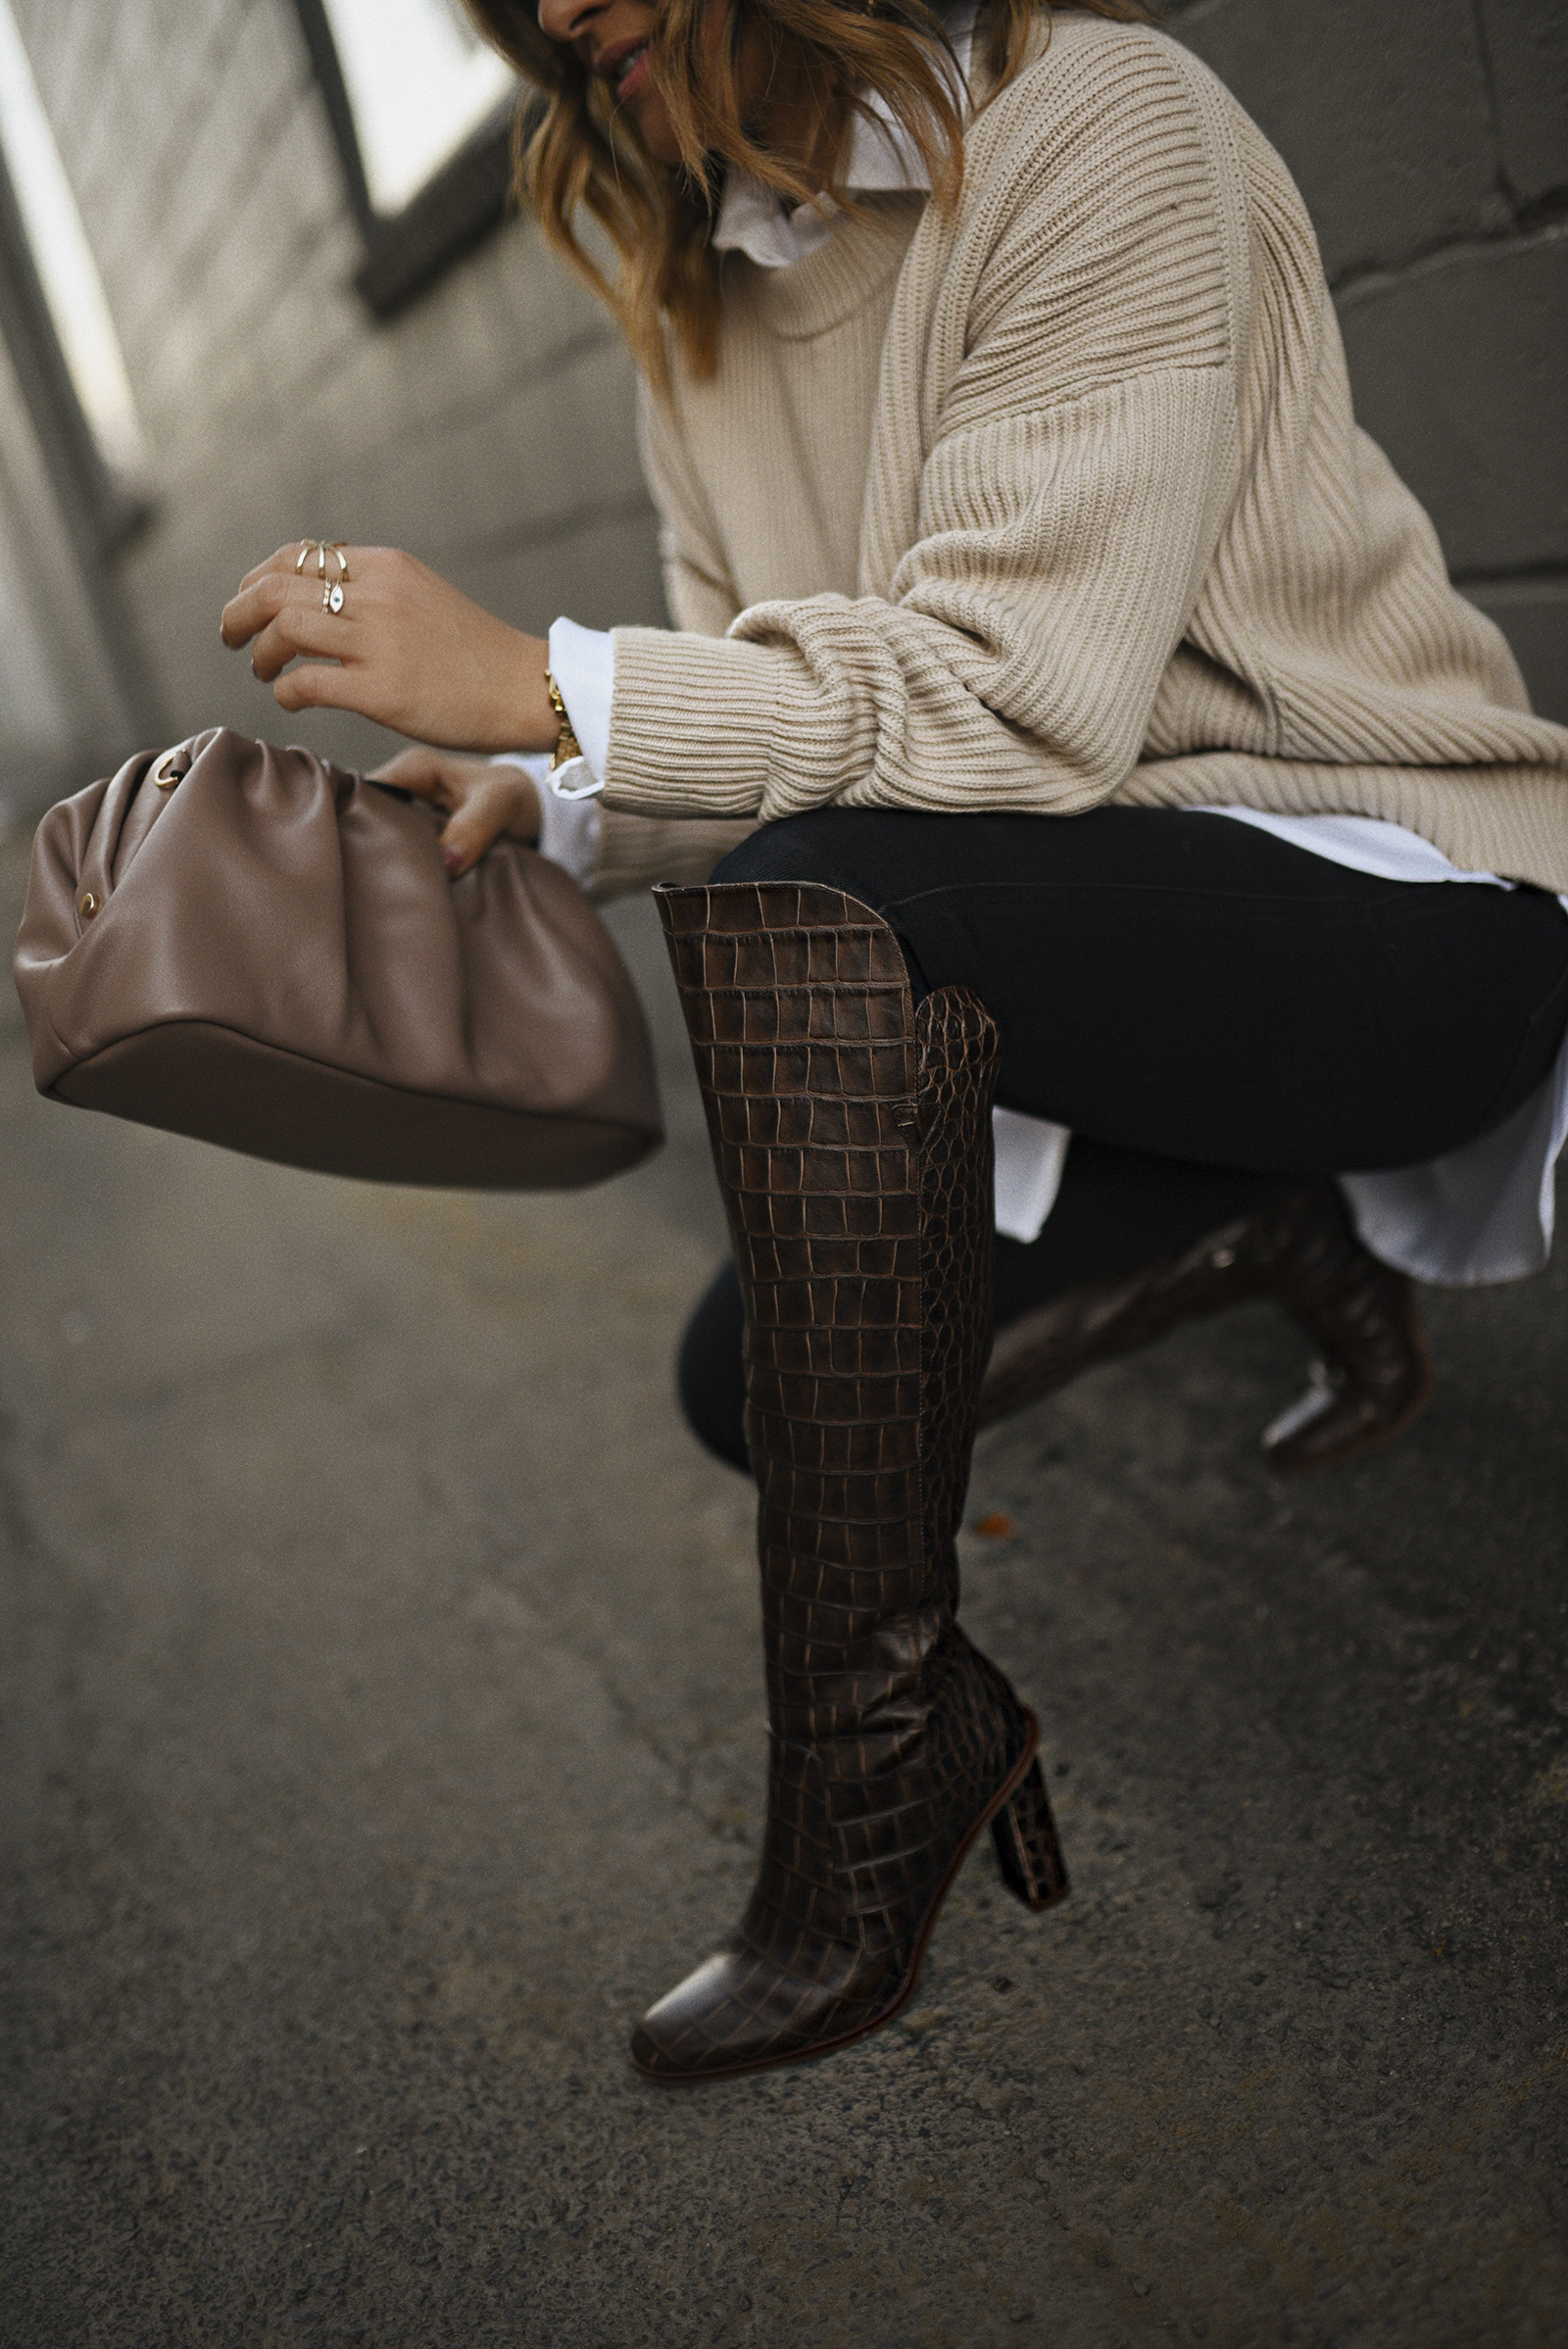 Carolina Hellal of Chic Talk wearing a Michael Stars knit sweater, Paige black skinny jeans, Vince Camuto croc-embossed boots and Target pouch bag. 